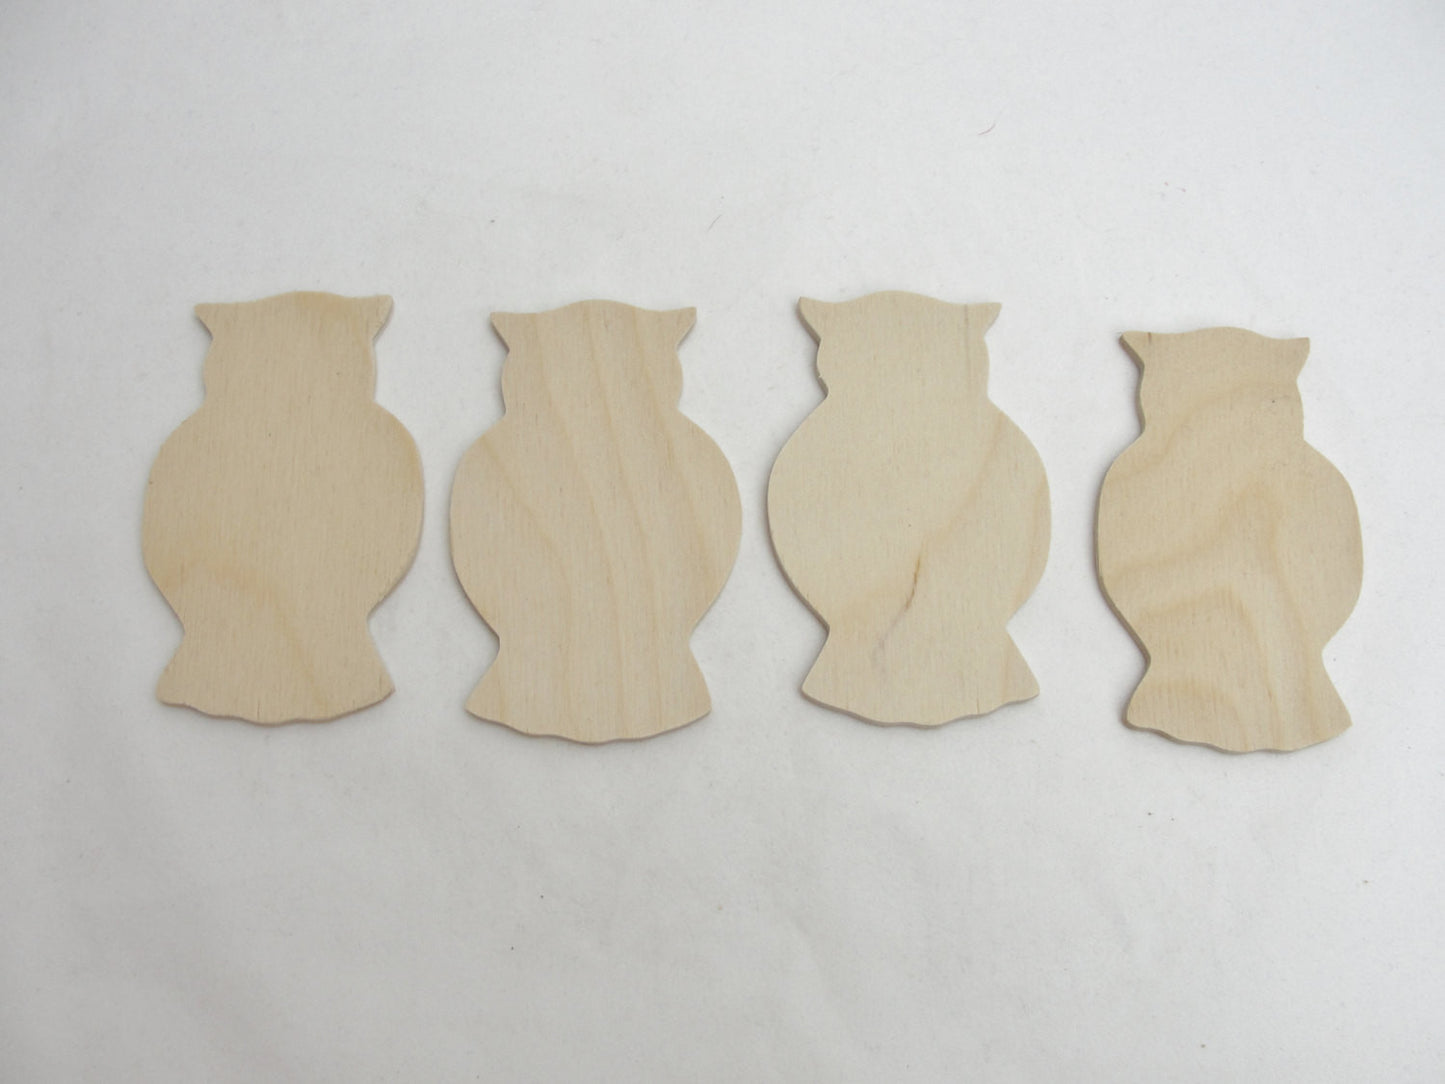 Large owl cutouts set of 4 - Wood parts - Craft Supply House